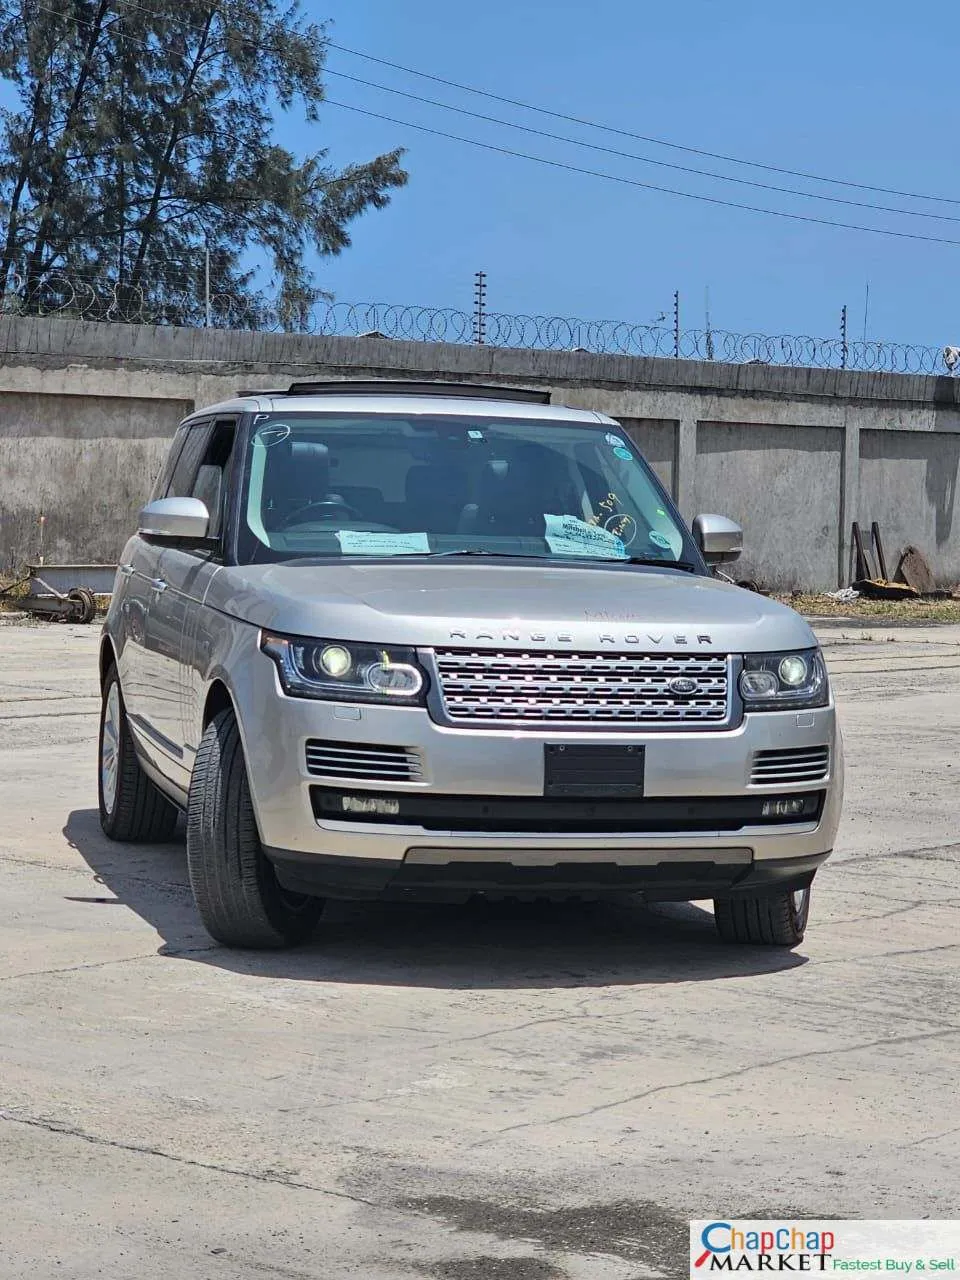 RANGE ROVER VOGUE GOLF You Pay 40% DEPOSIT TRADE IN OK For sale in kenya exclusive 2017